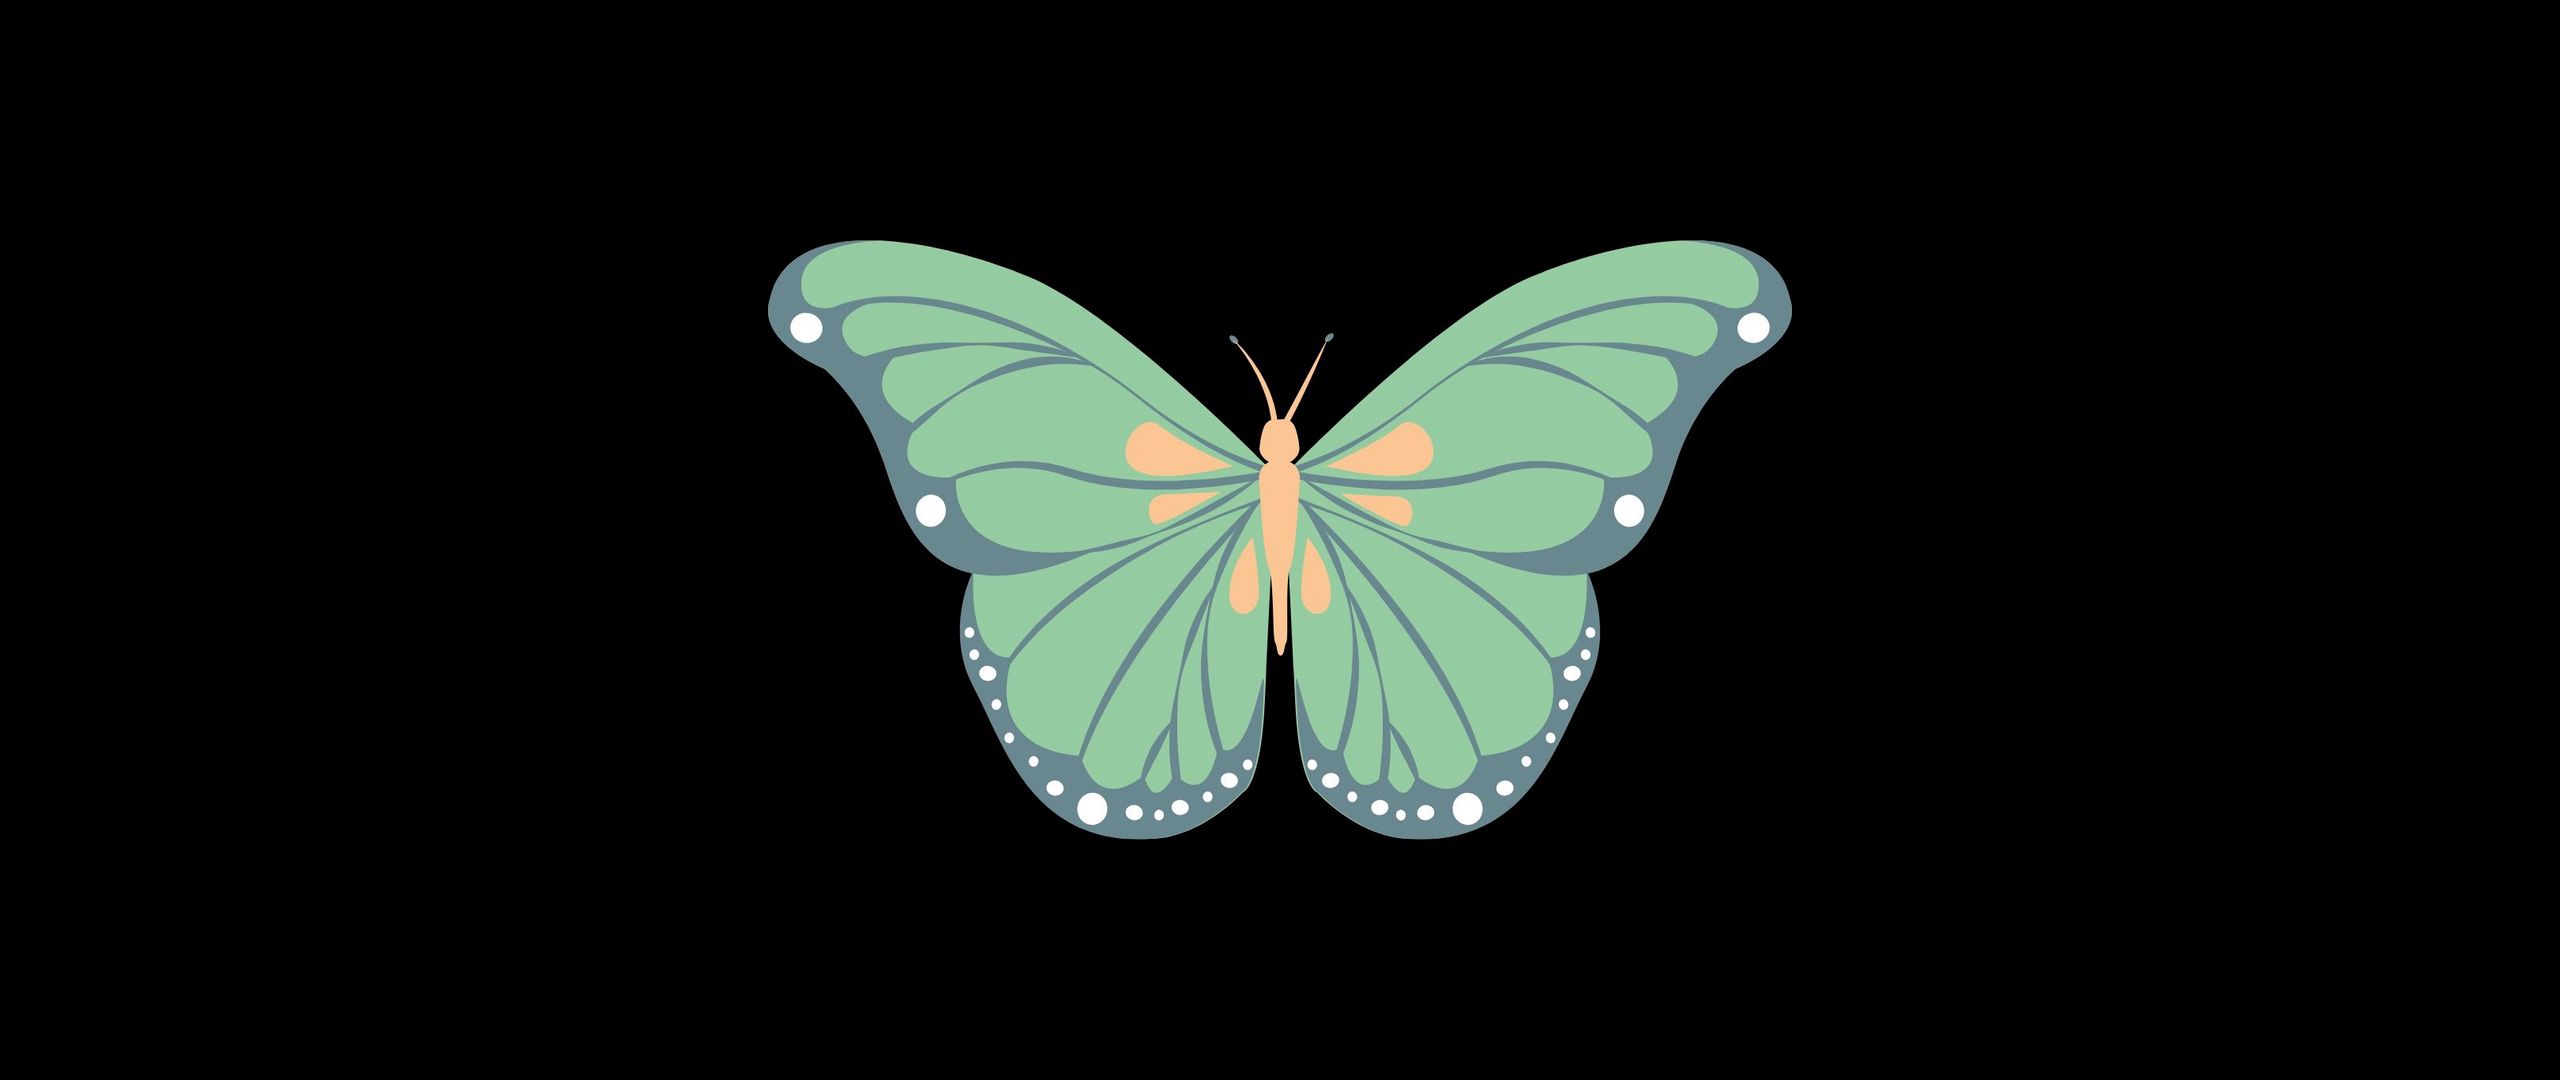 Download wallpaper 2560x1080 butterfly, art, vector, minimalism dual wide 1080p HD background